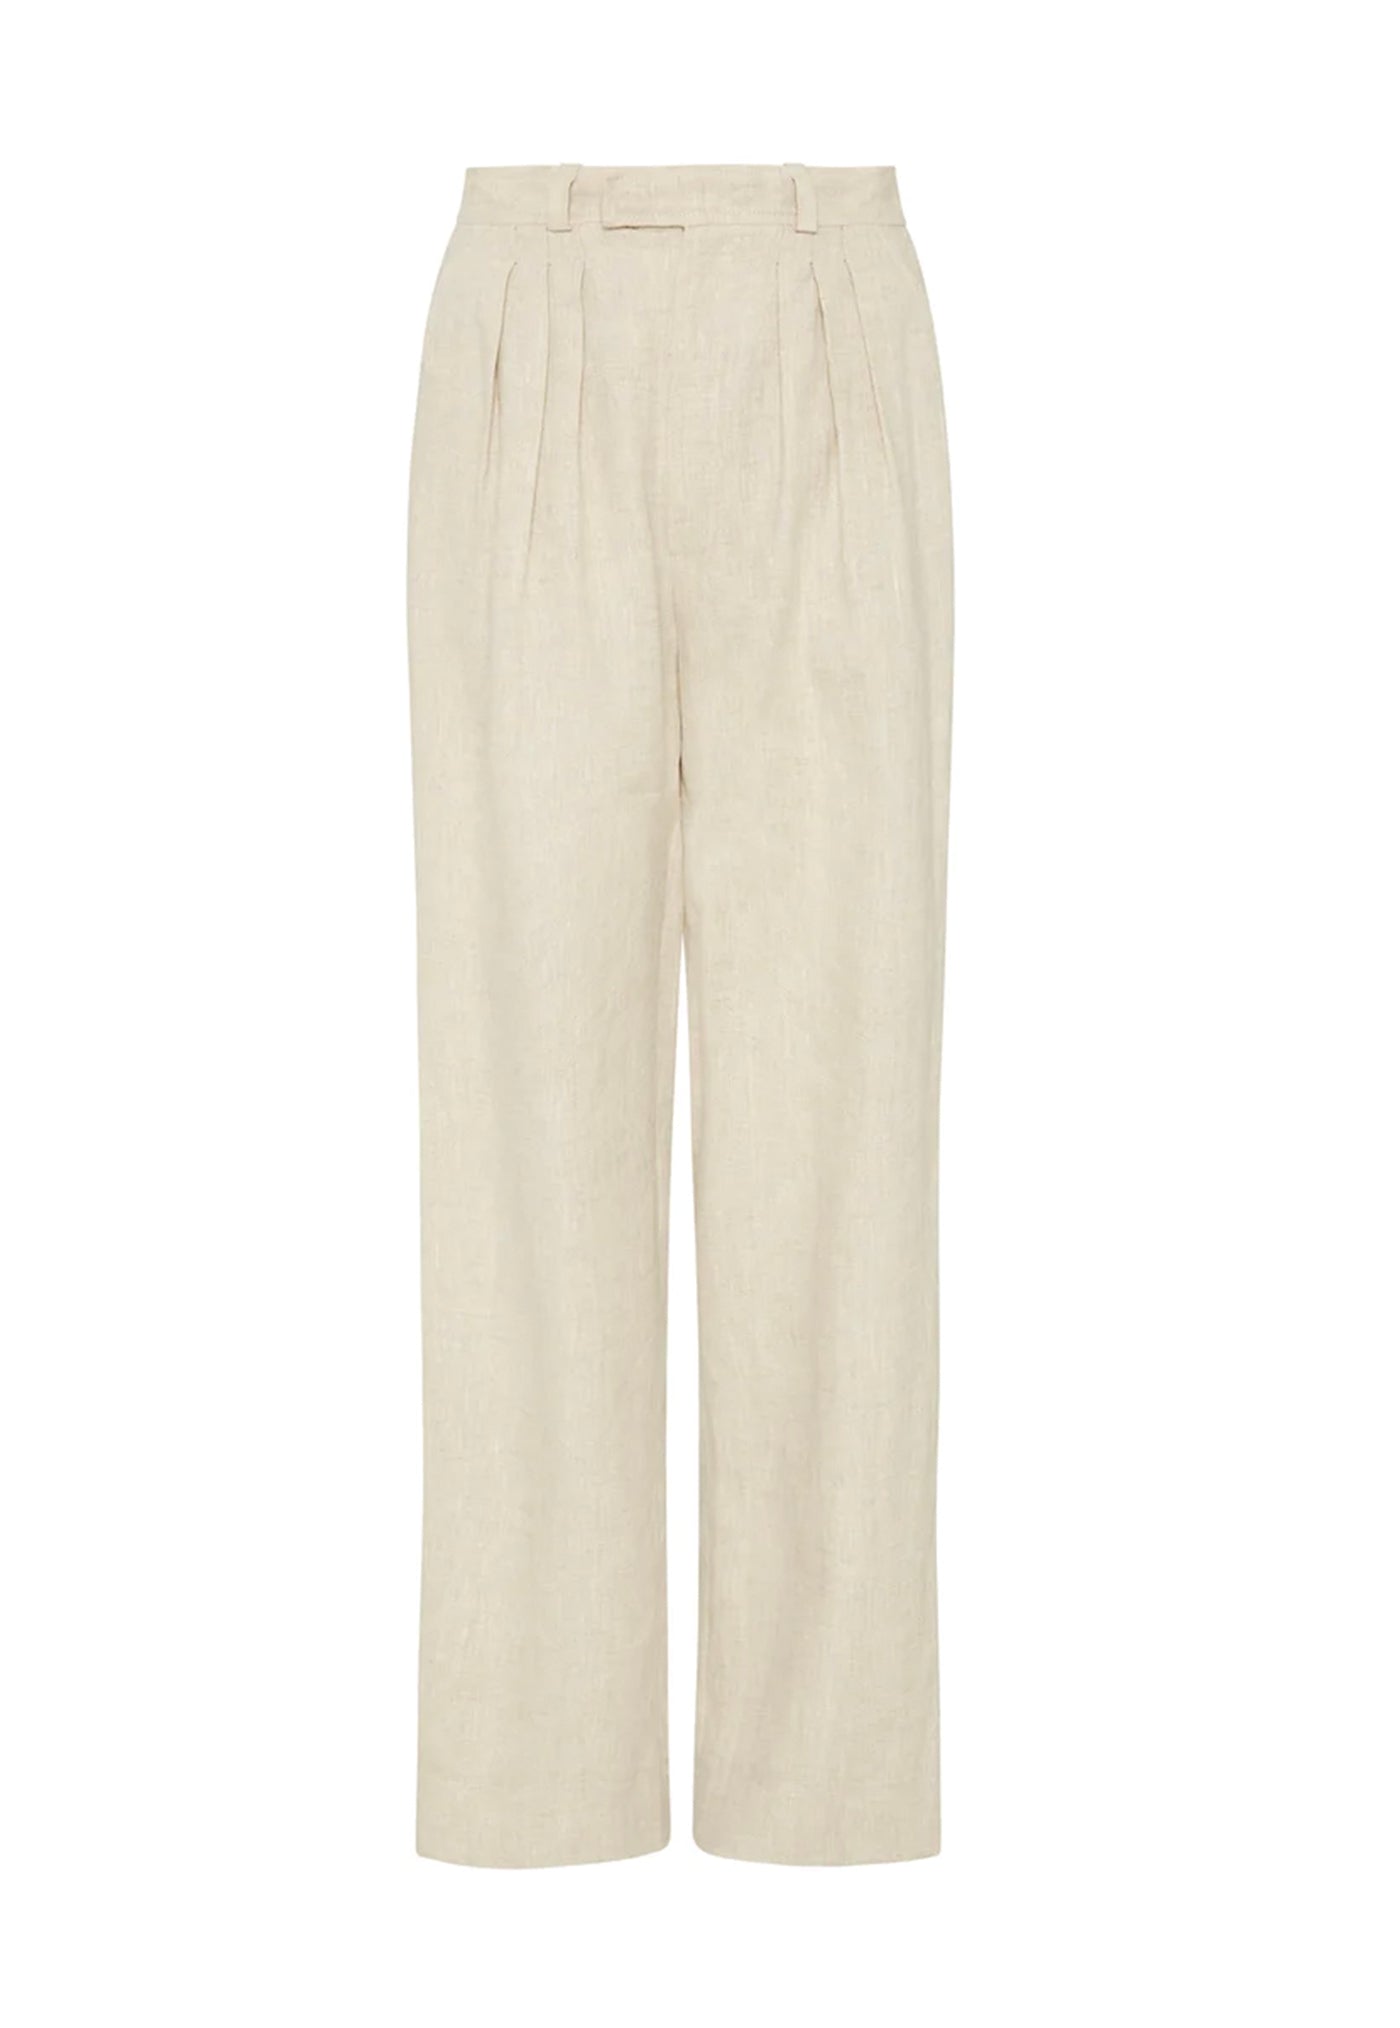 Louis Trouser - Natural sold by Angel Divine